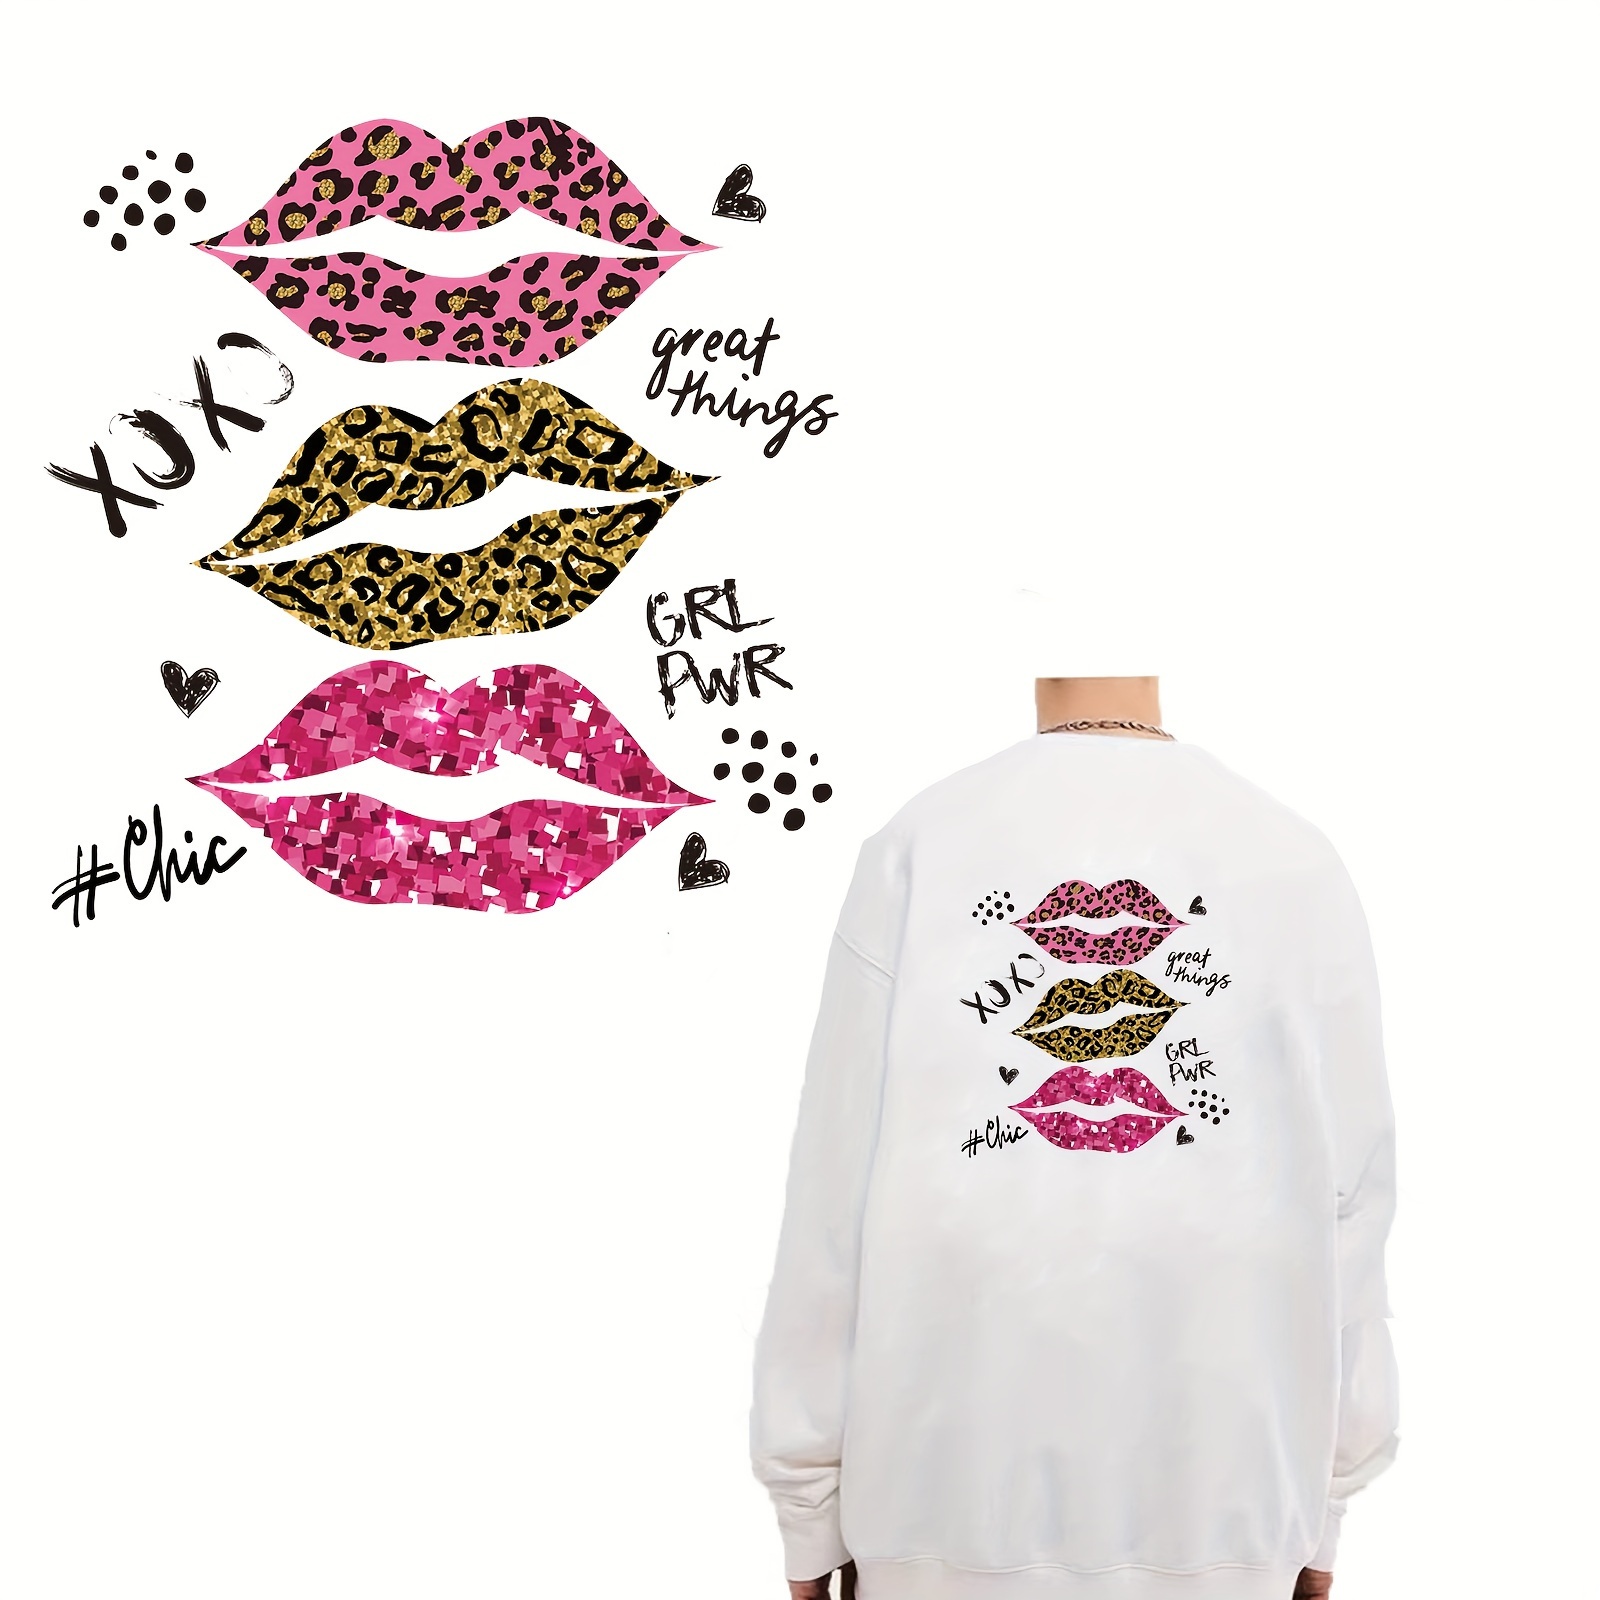 Vinyl Iron on Stickers For Clothes Sexy Lips With American - Temu